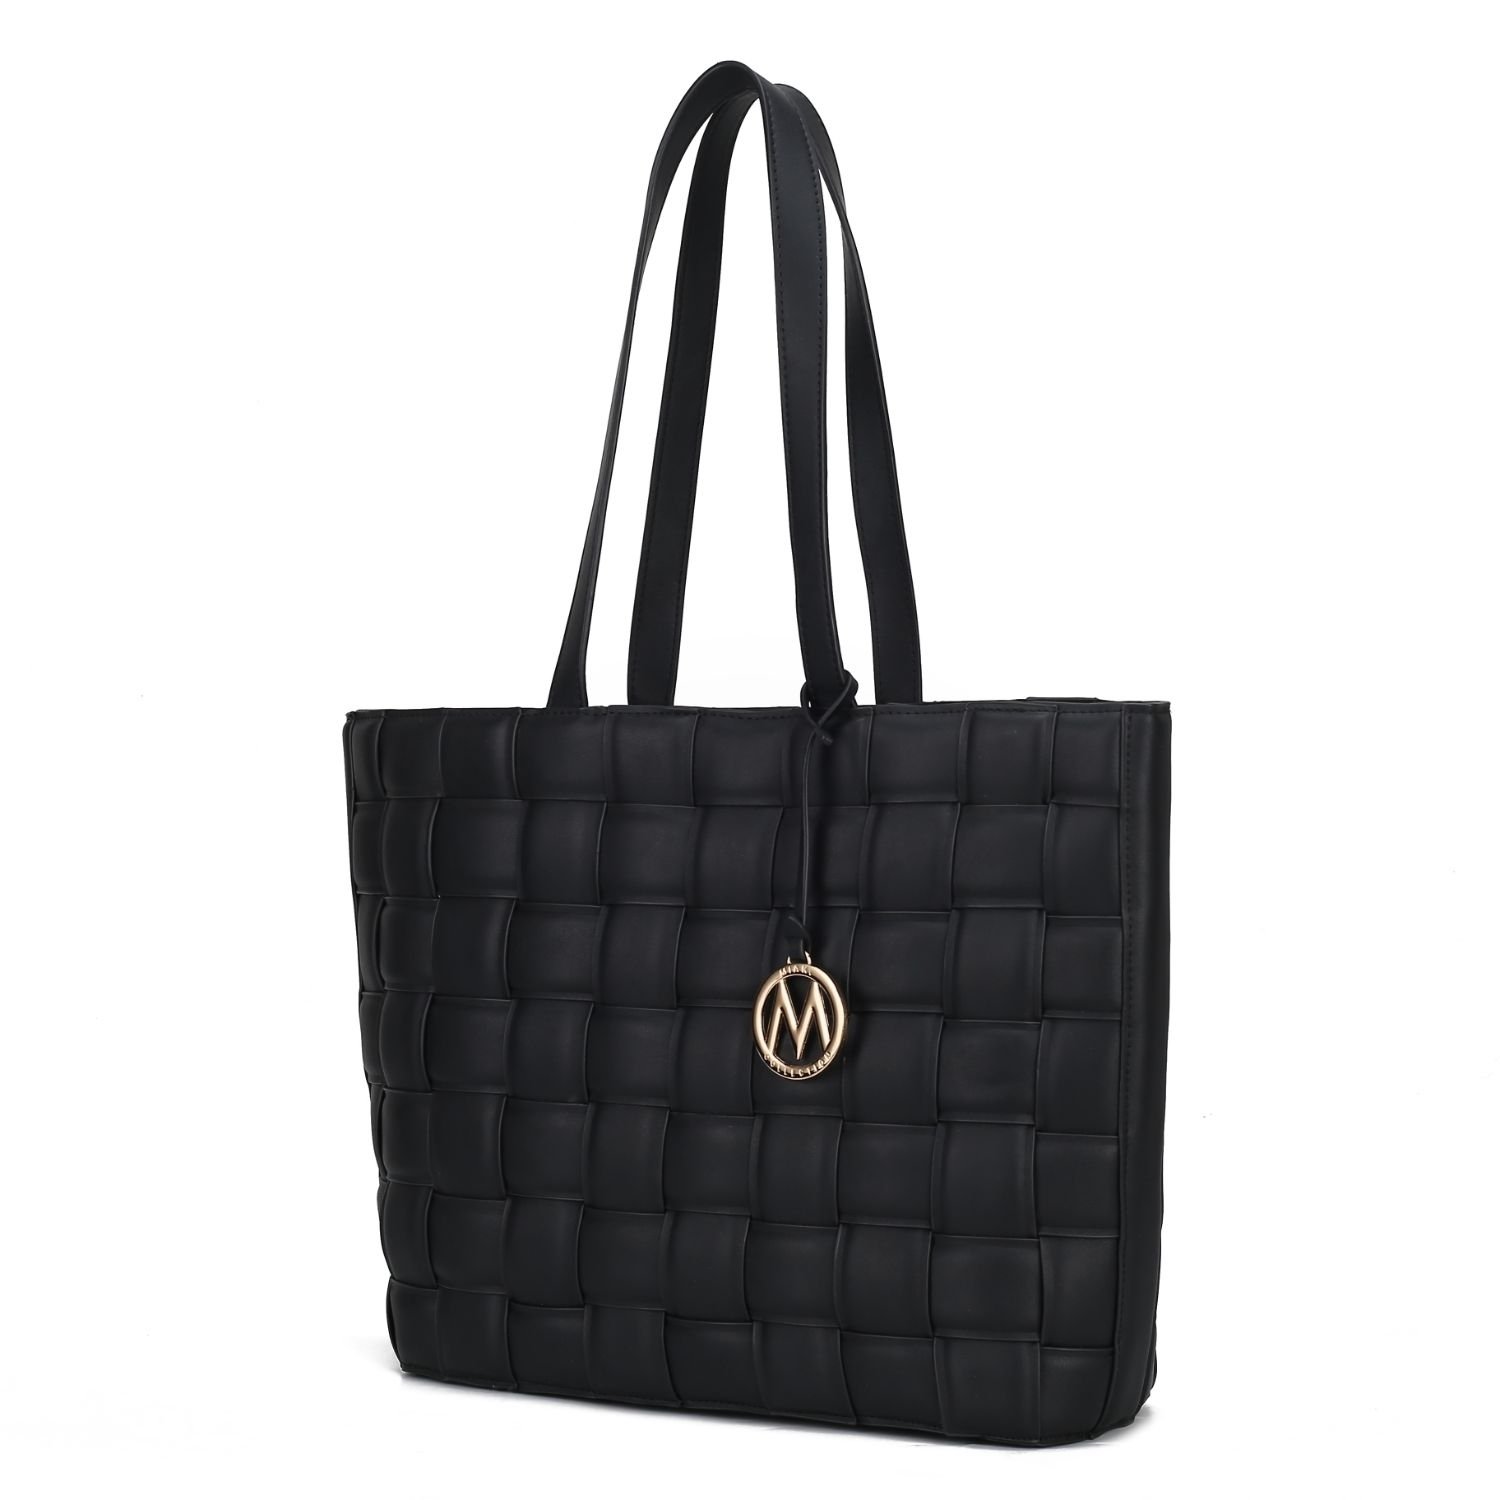 MKF Collection Rowan Woven Vegan Leather Women's Tote Bag By Mia K - Pewter